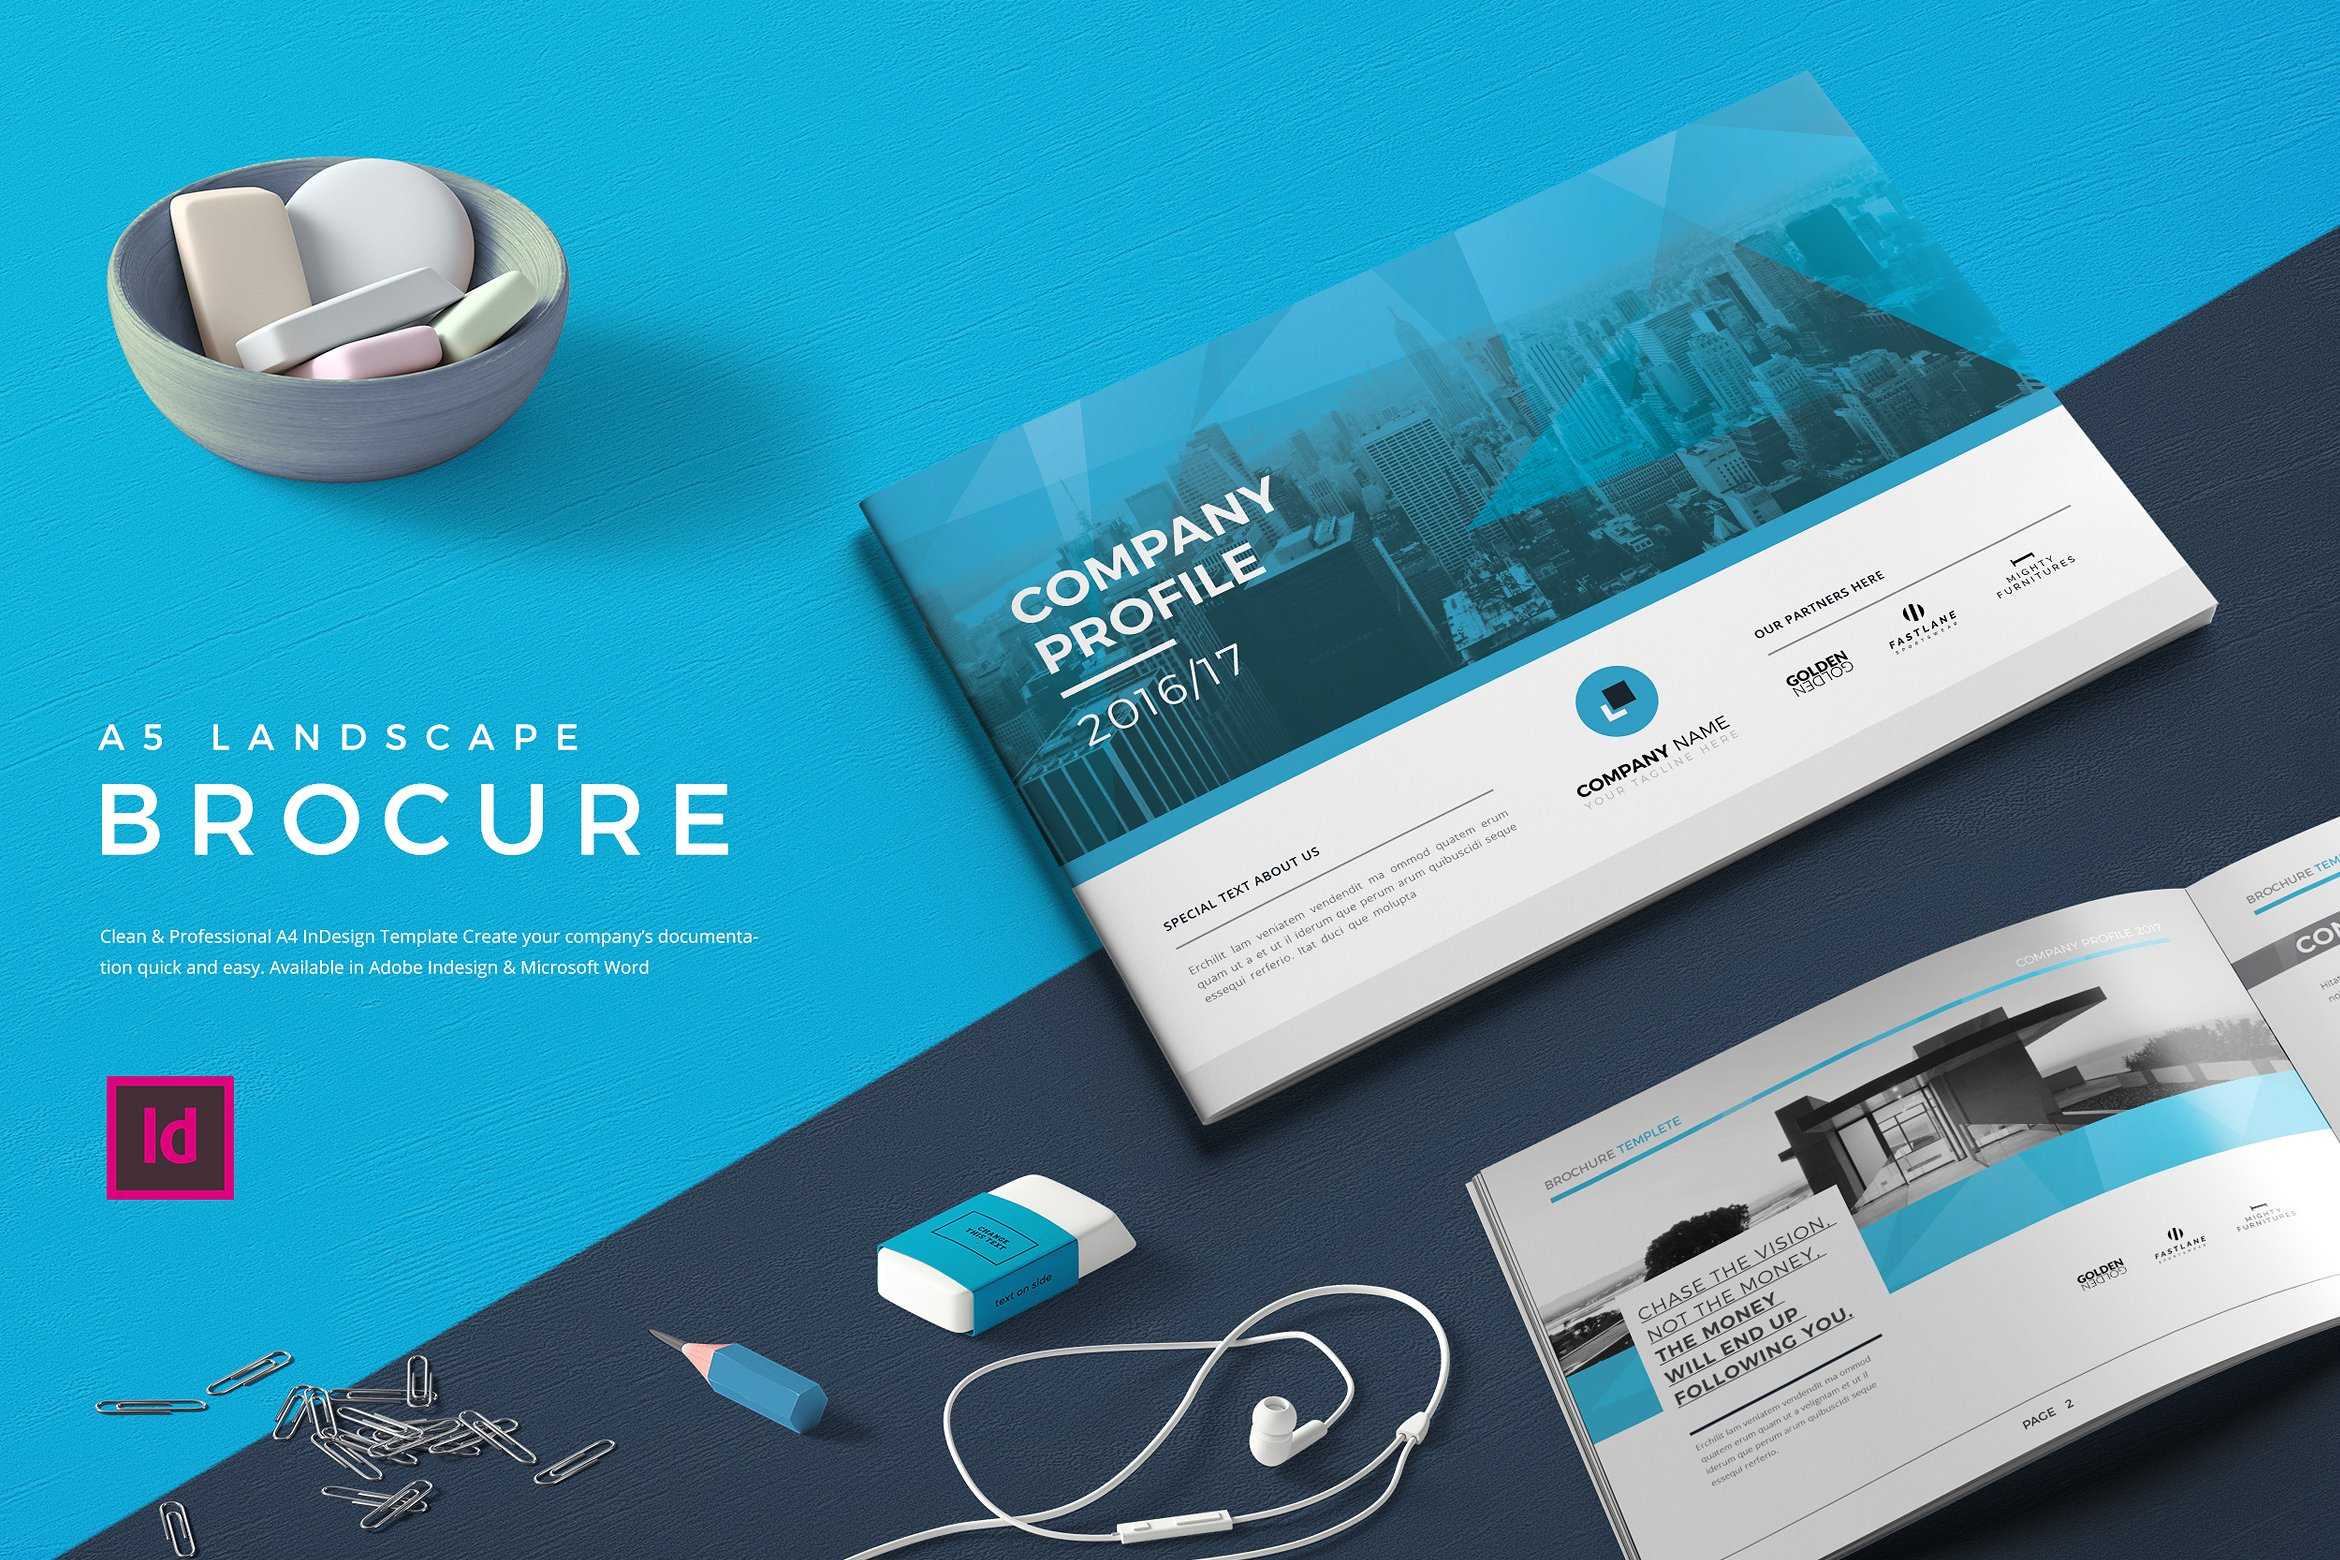 30+ Company Profile Brochure Templates | Decolore Throughout Adobe Indesign Brochure Templates